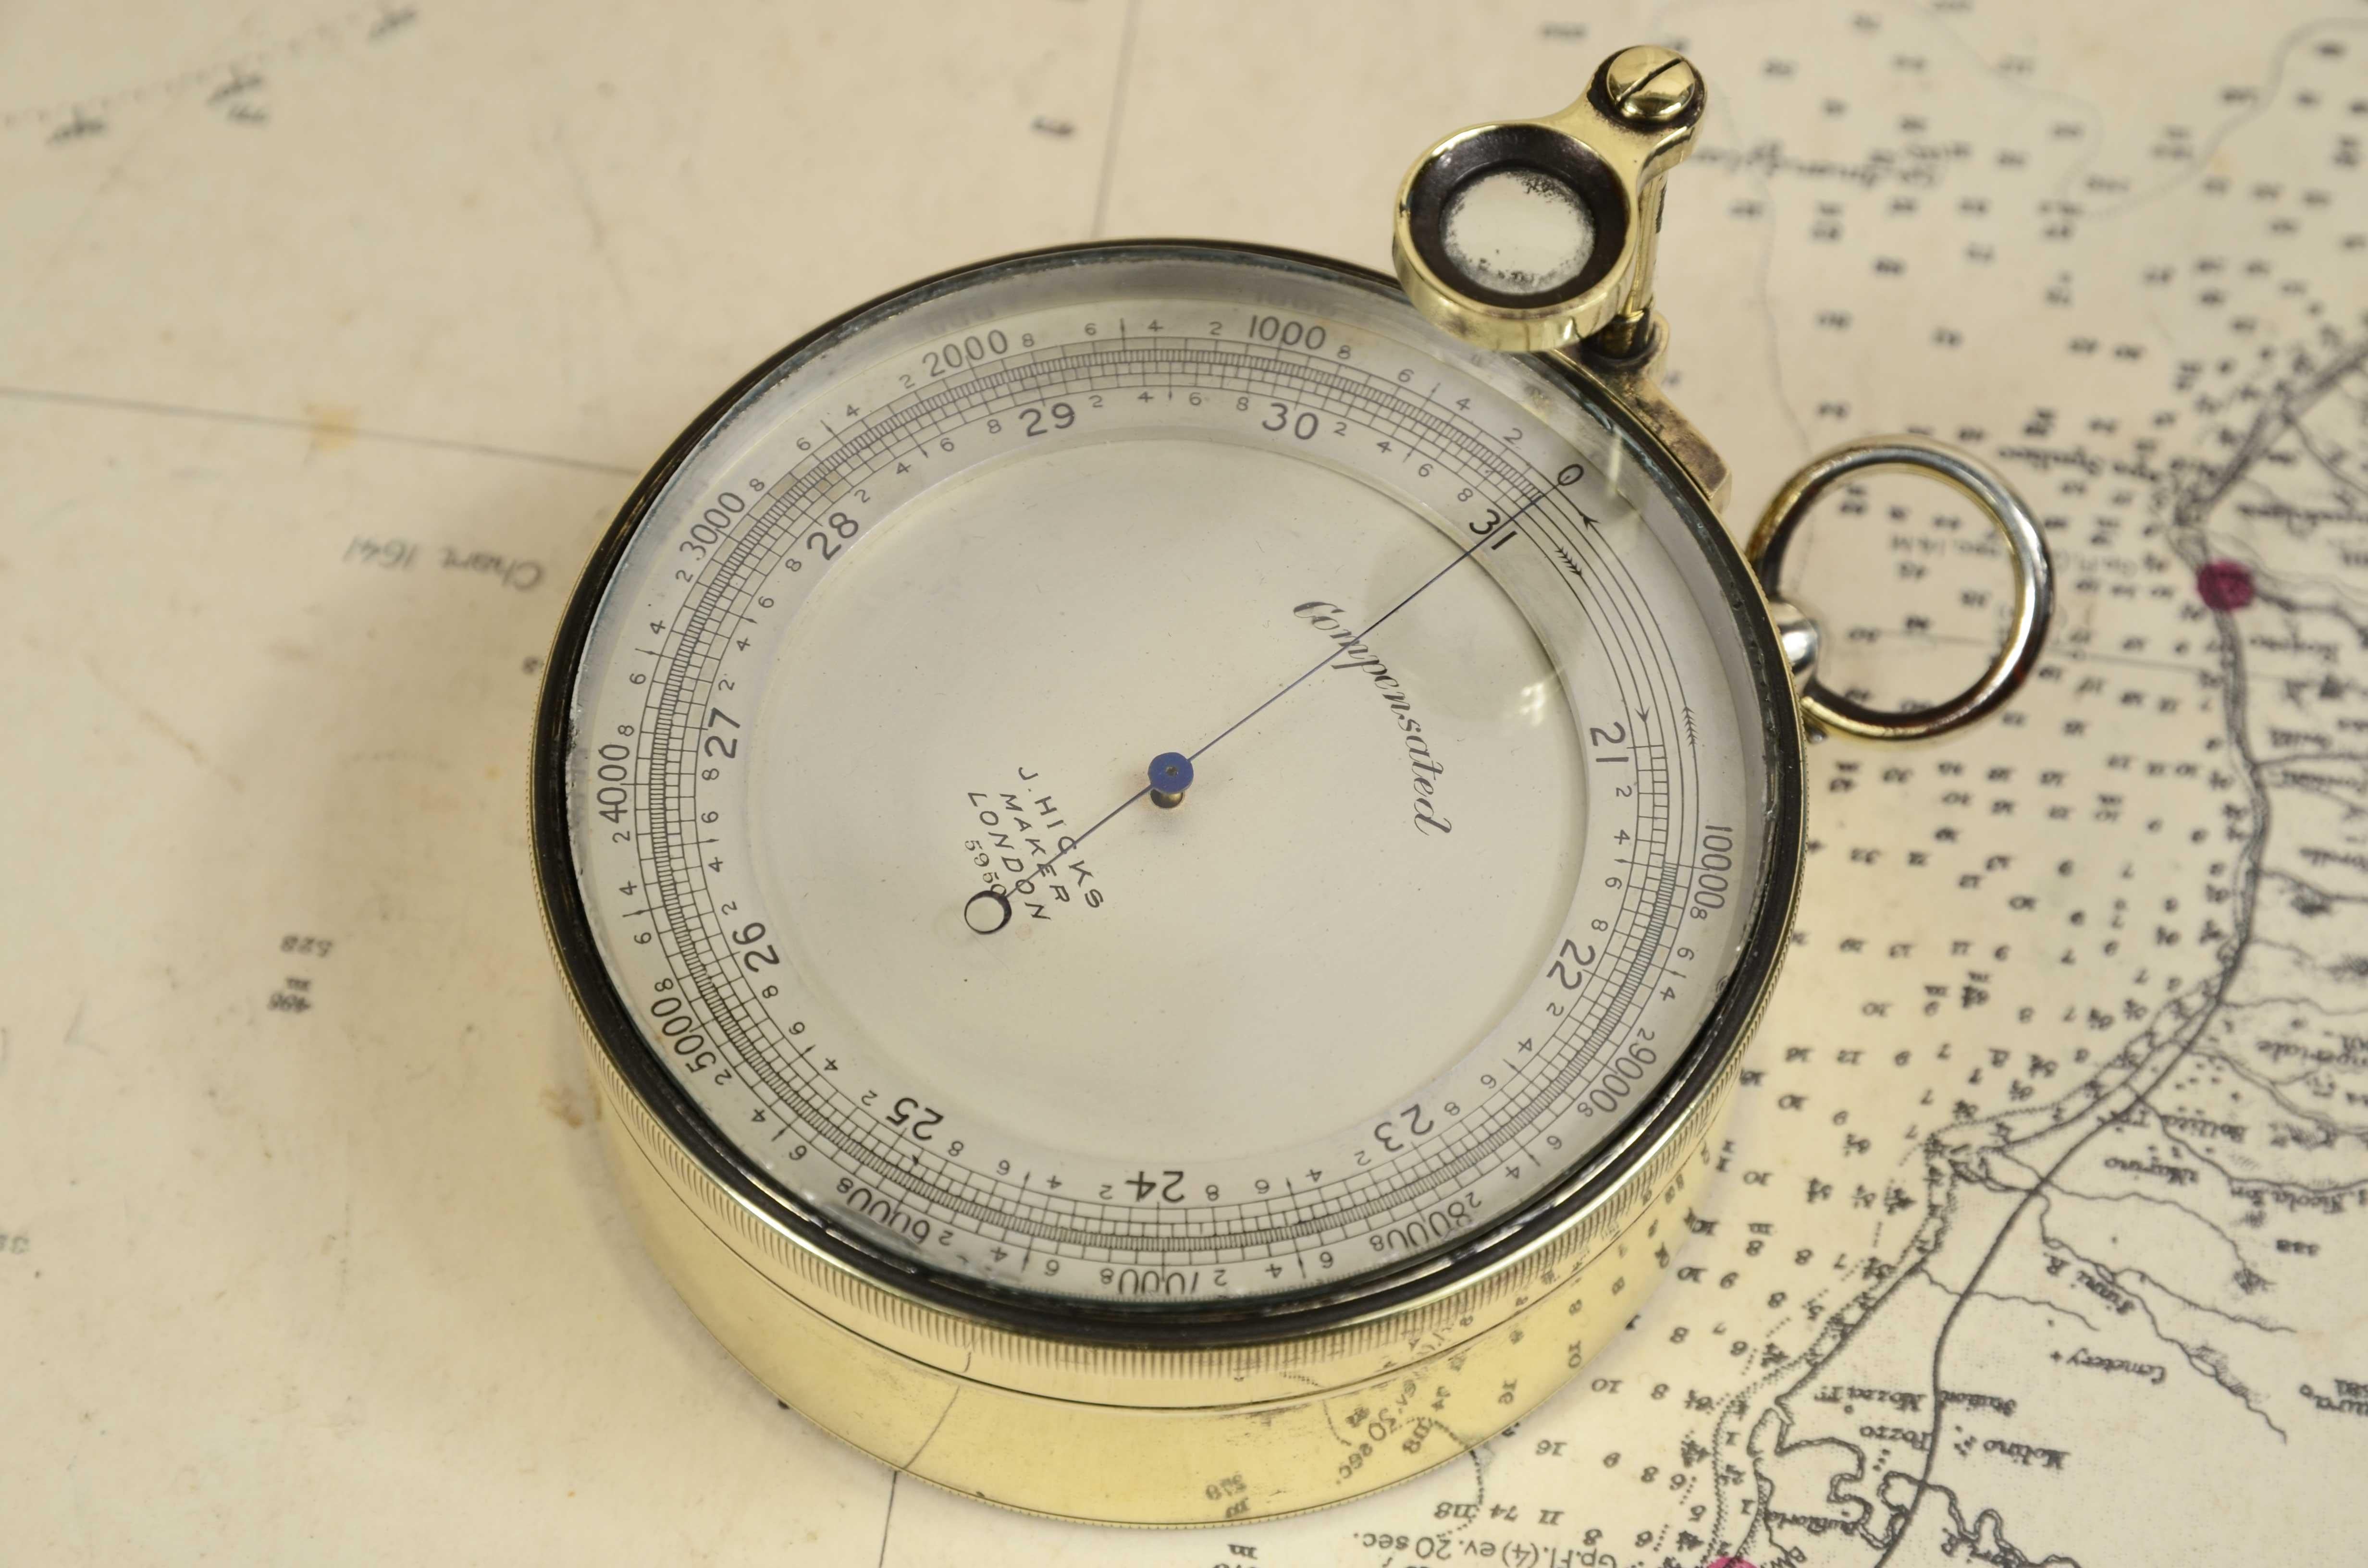 Brass compensated barometric altimeter complete with magnifying glass signed J. Hicks Maker London from the early 1900s. Diameter cm 7 - inches 2.8, thickness cm 3.2 - inches 1.3. Buono stato perfettamente funzionante. 
An altimeter is an instrument